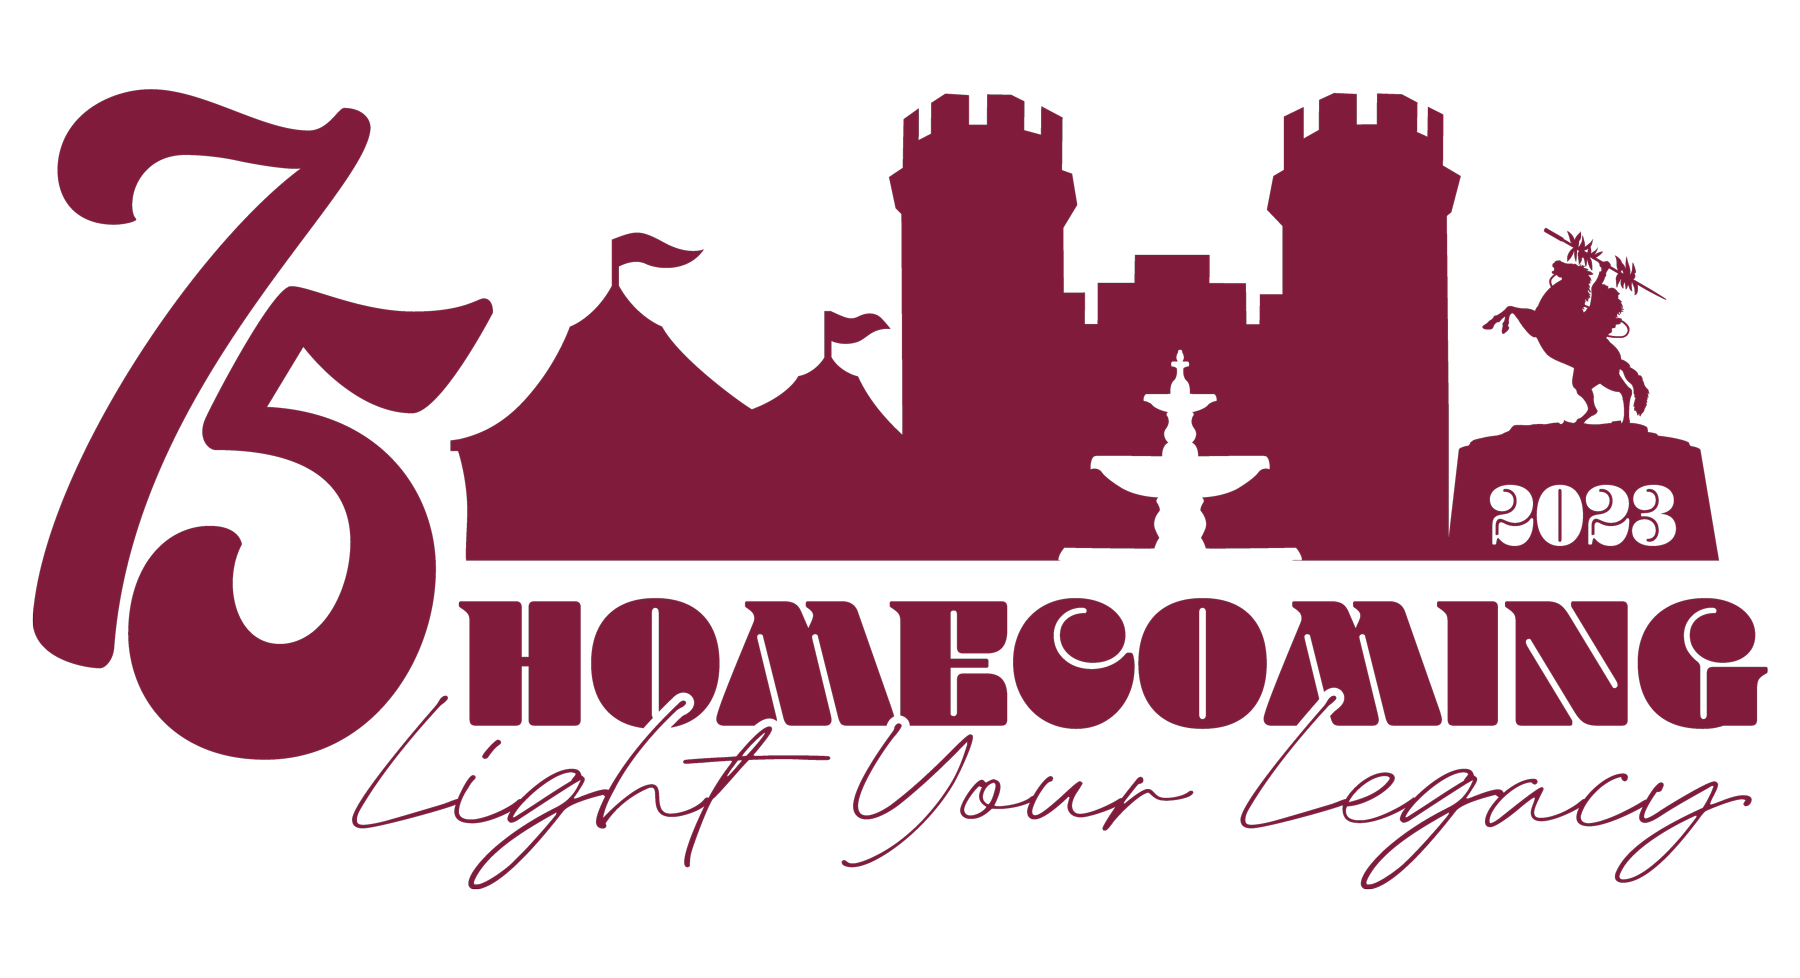 A garnet logo featuring the text '75 Homecoming 2023, Light your legacy'